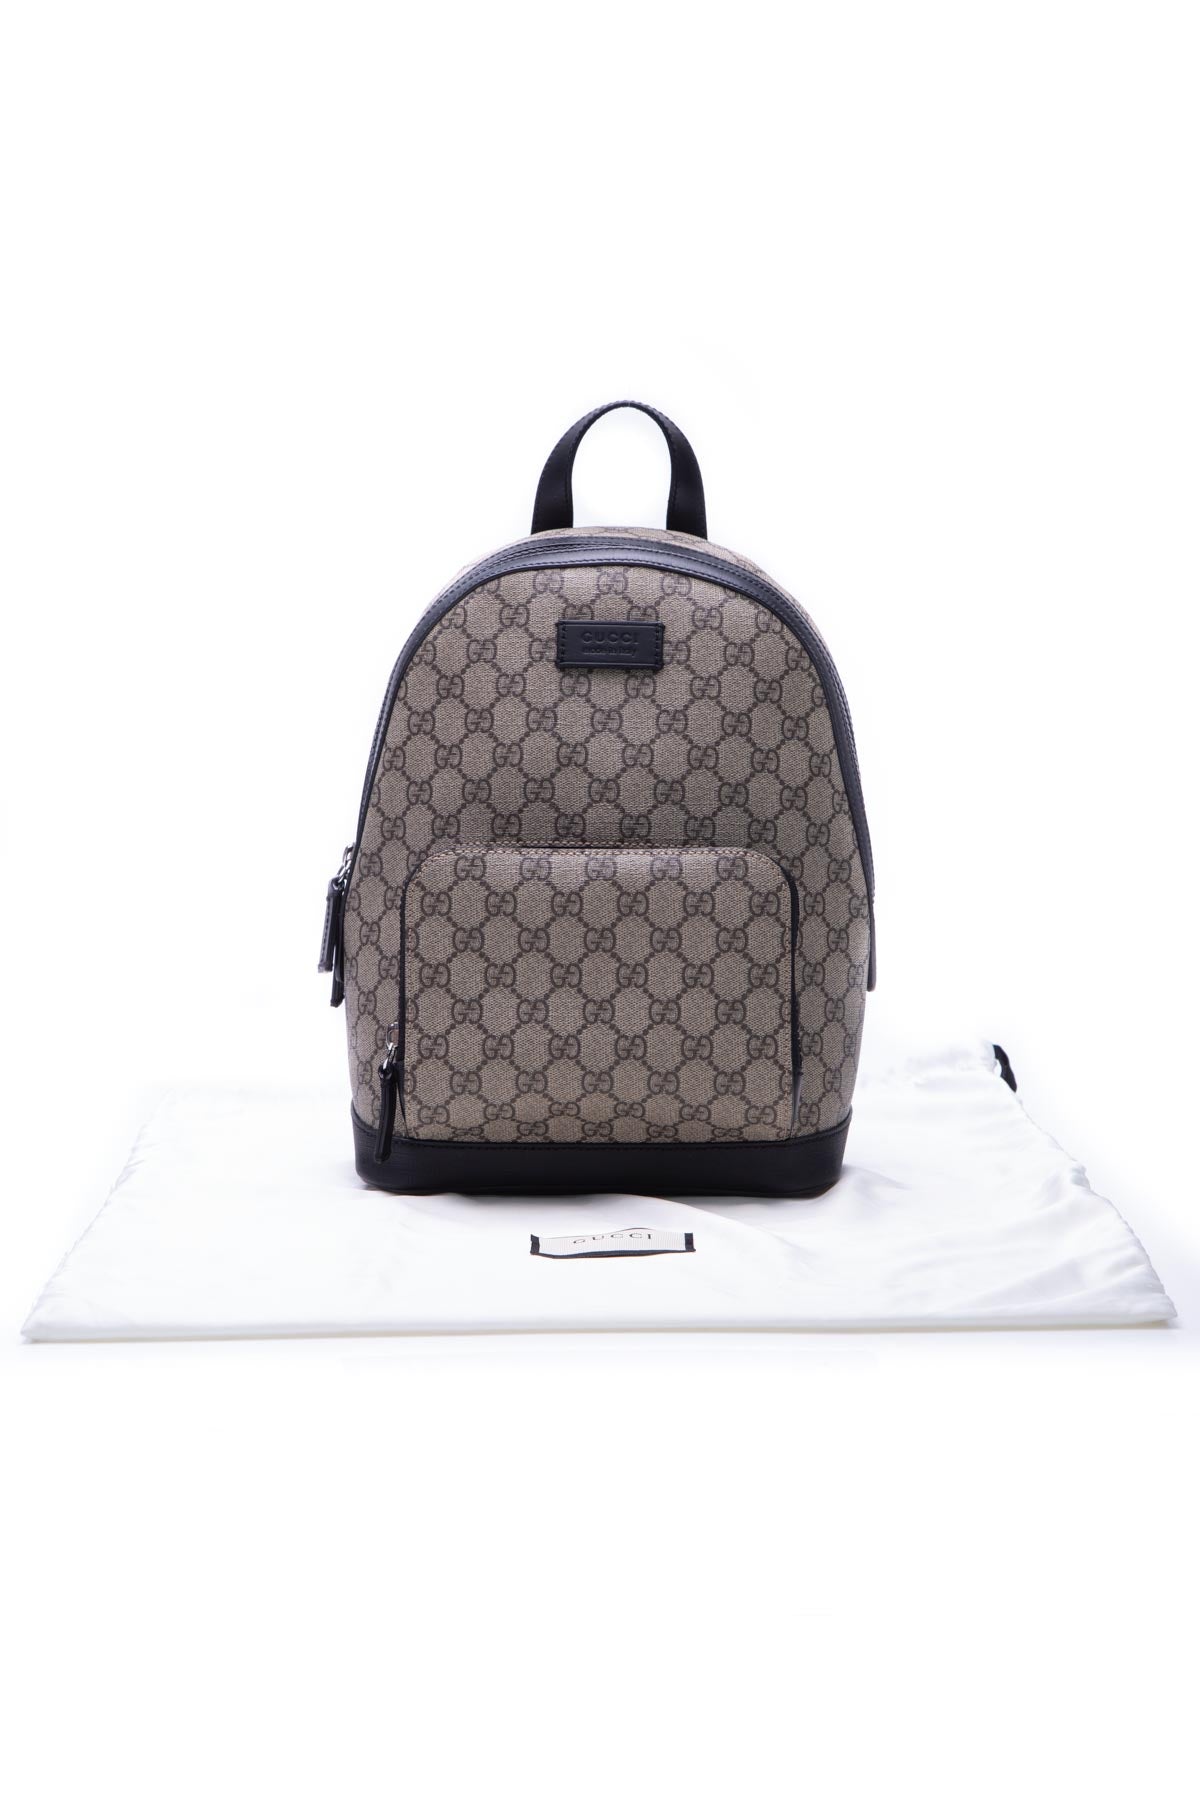 Gucci Beige/Black GG Supreme Canvas and Leather Eden Backpack